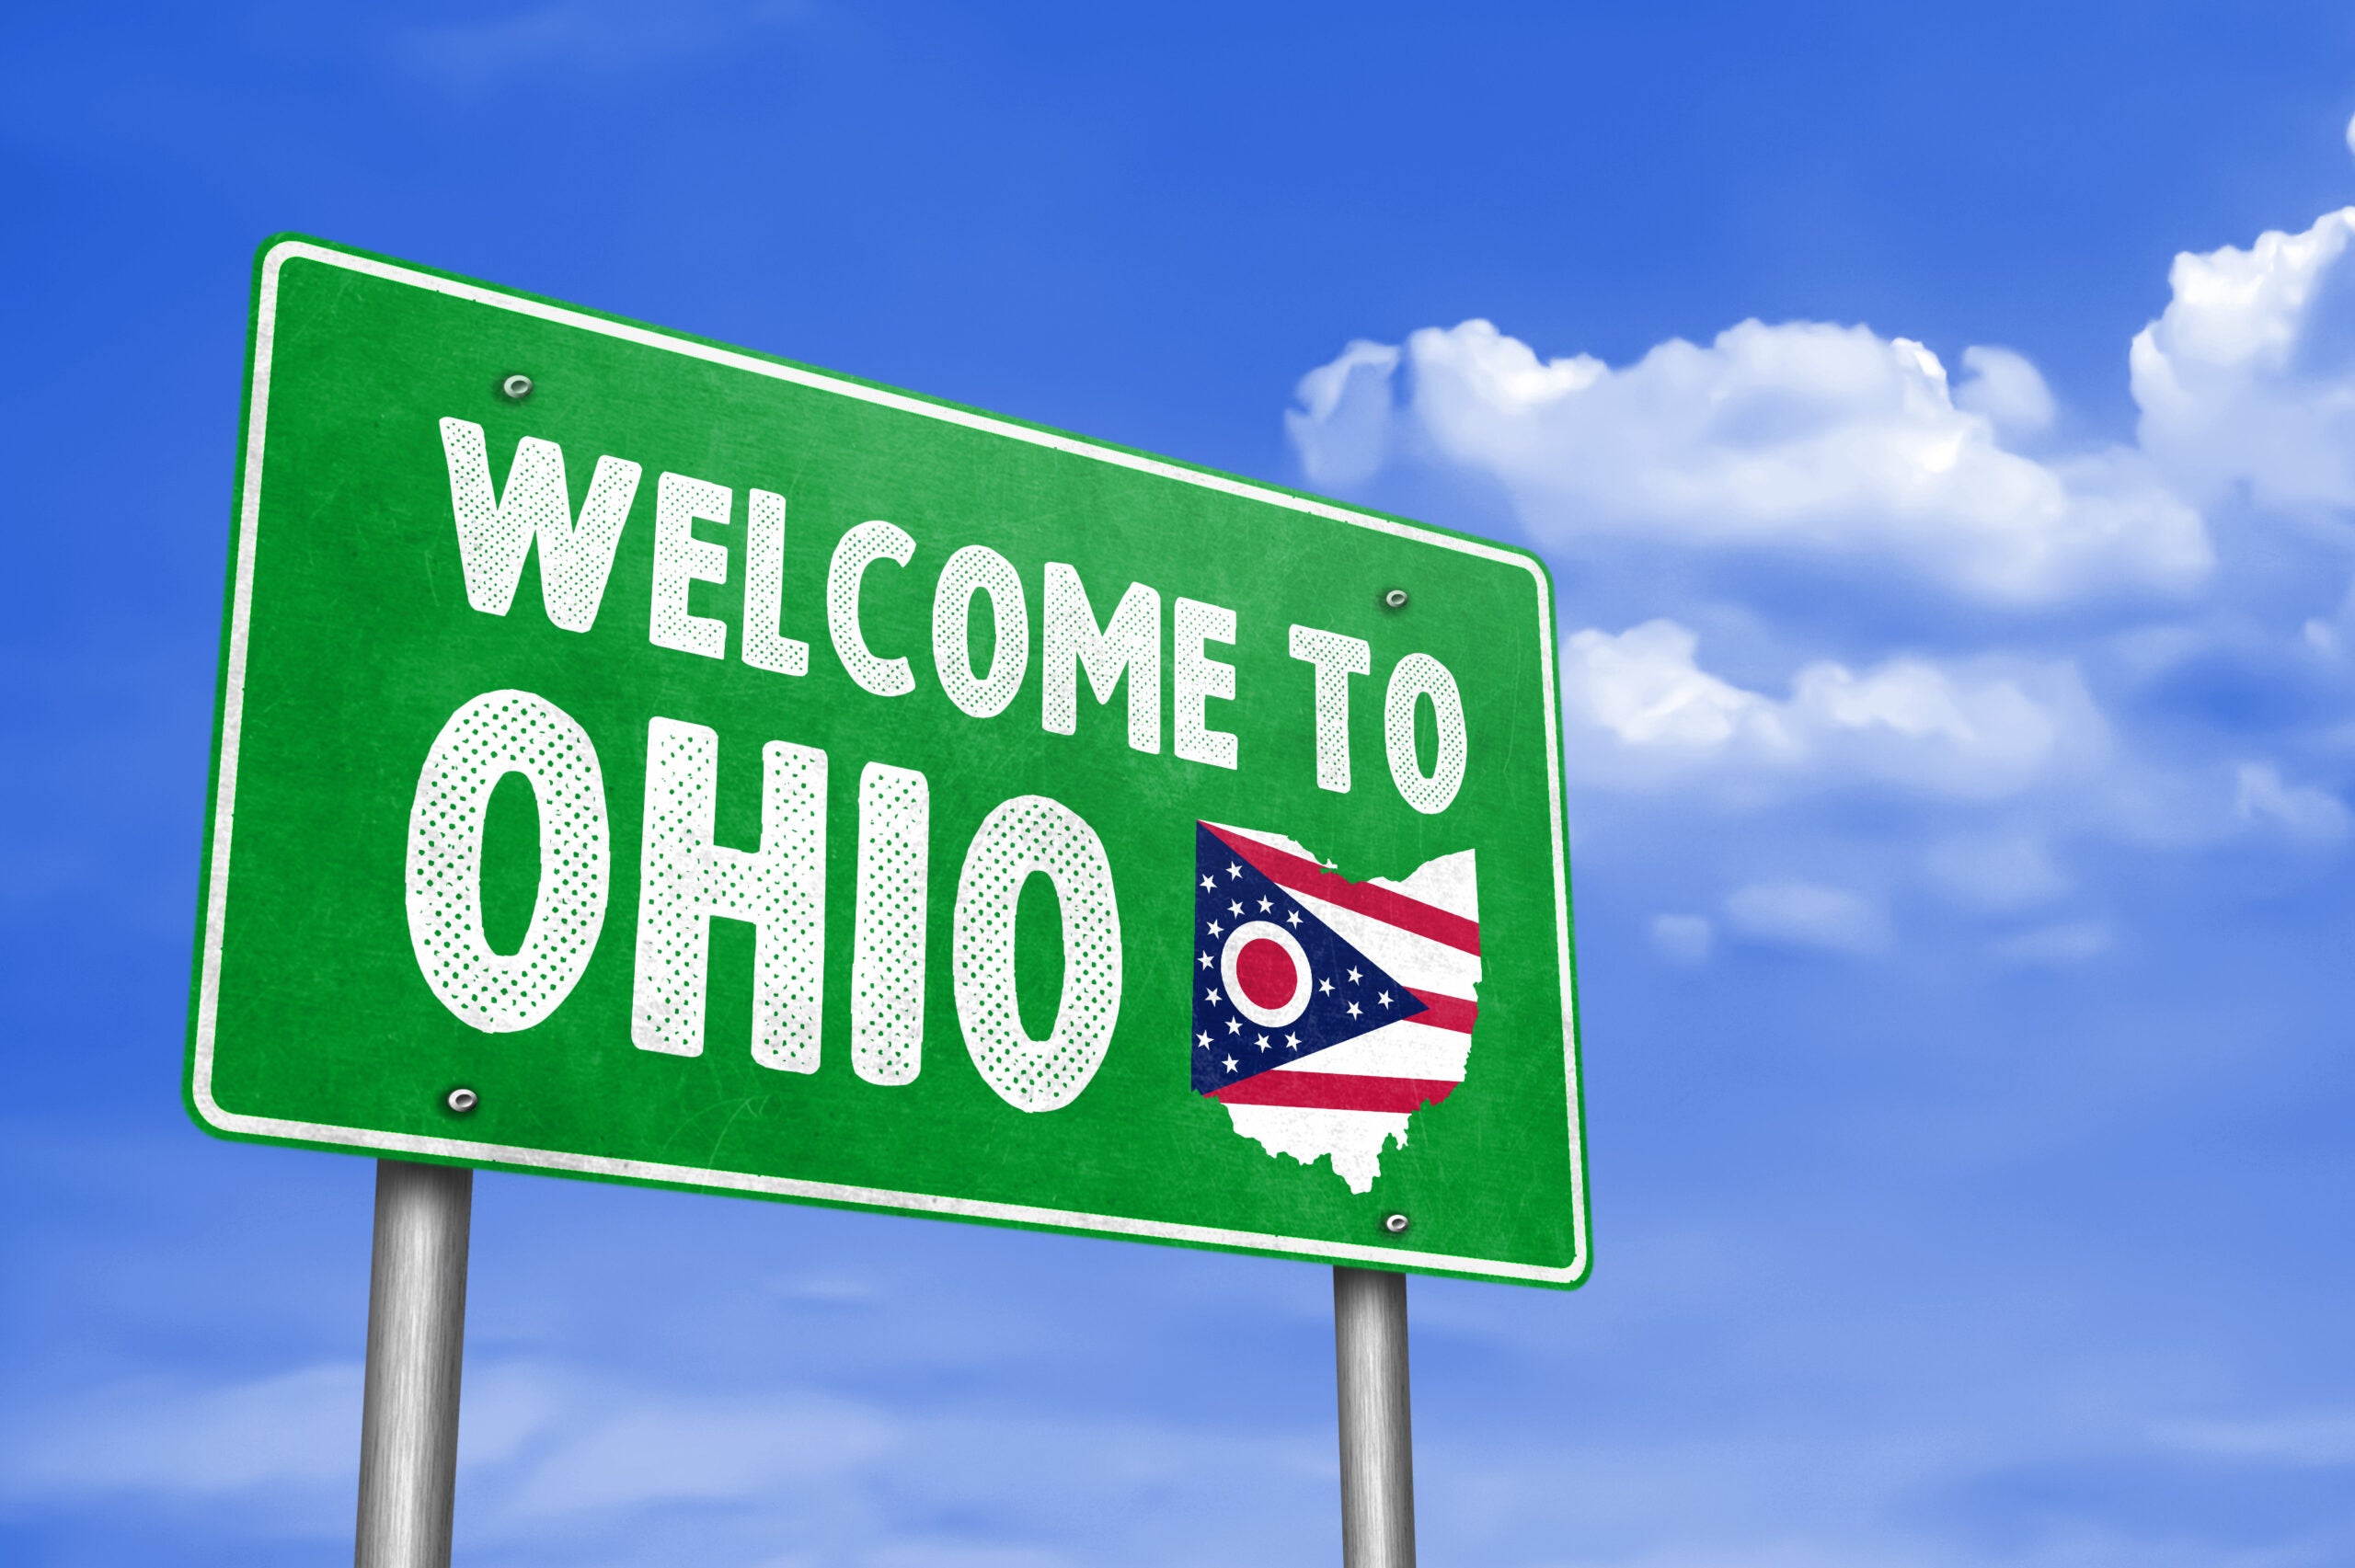 Ohio Cannabis Advocates Resubmit Legalization Petition After Their Last One Was Rejected